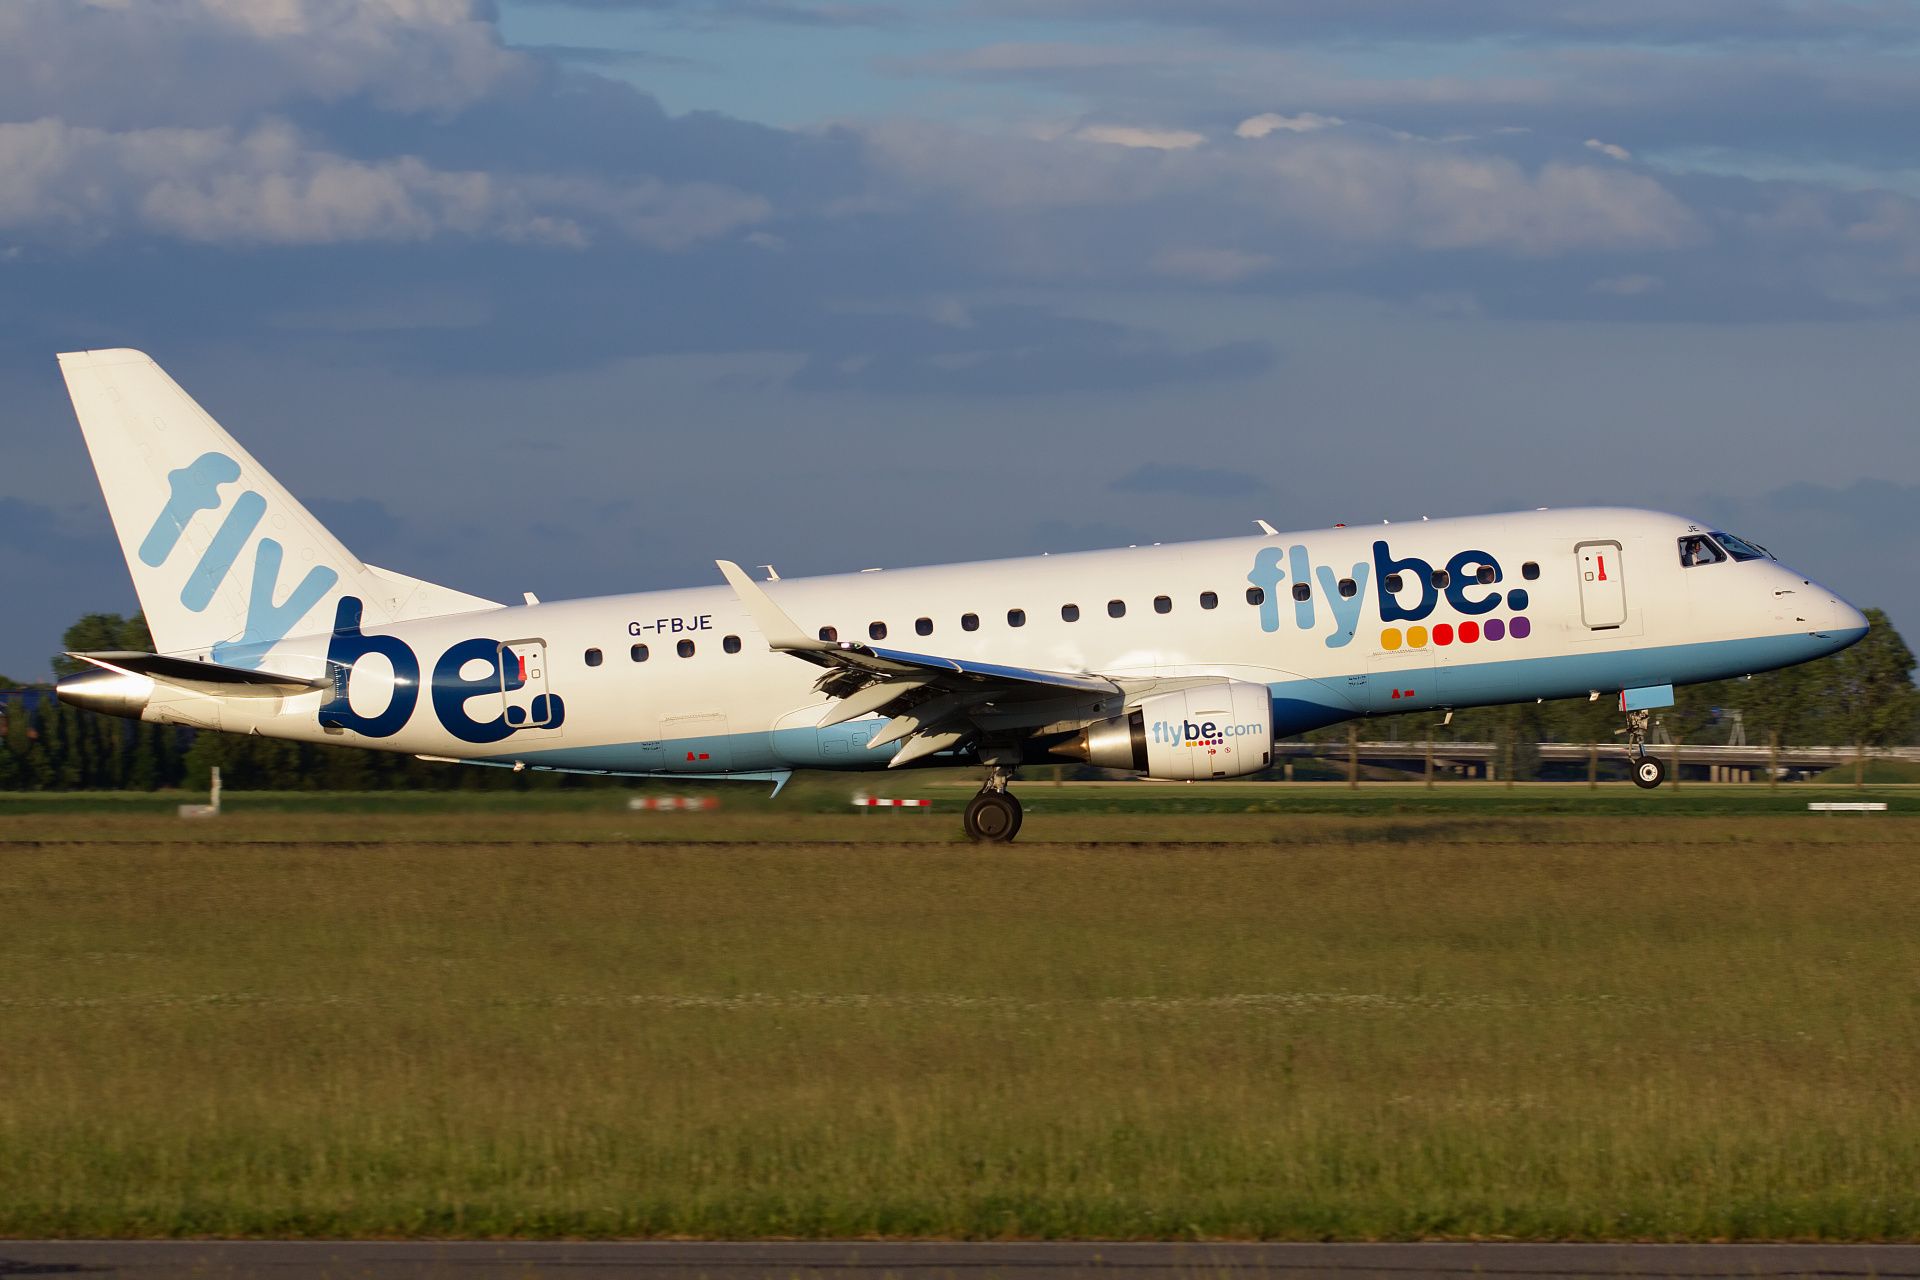 G-FBJE, FlyBe (Aircraft » Schiphol Spotting » Embraer E175)